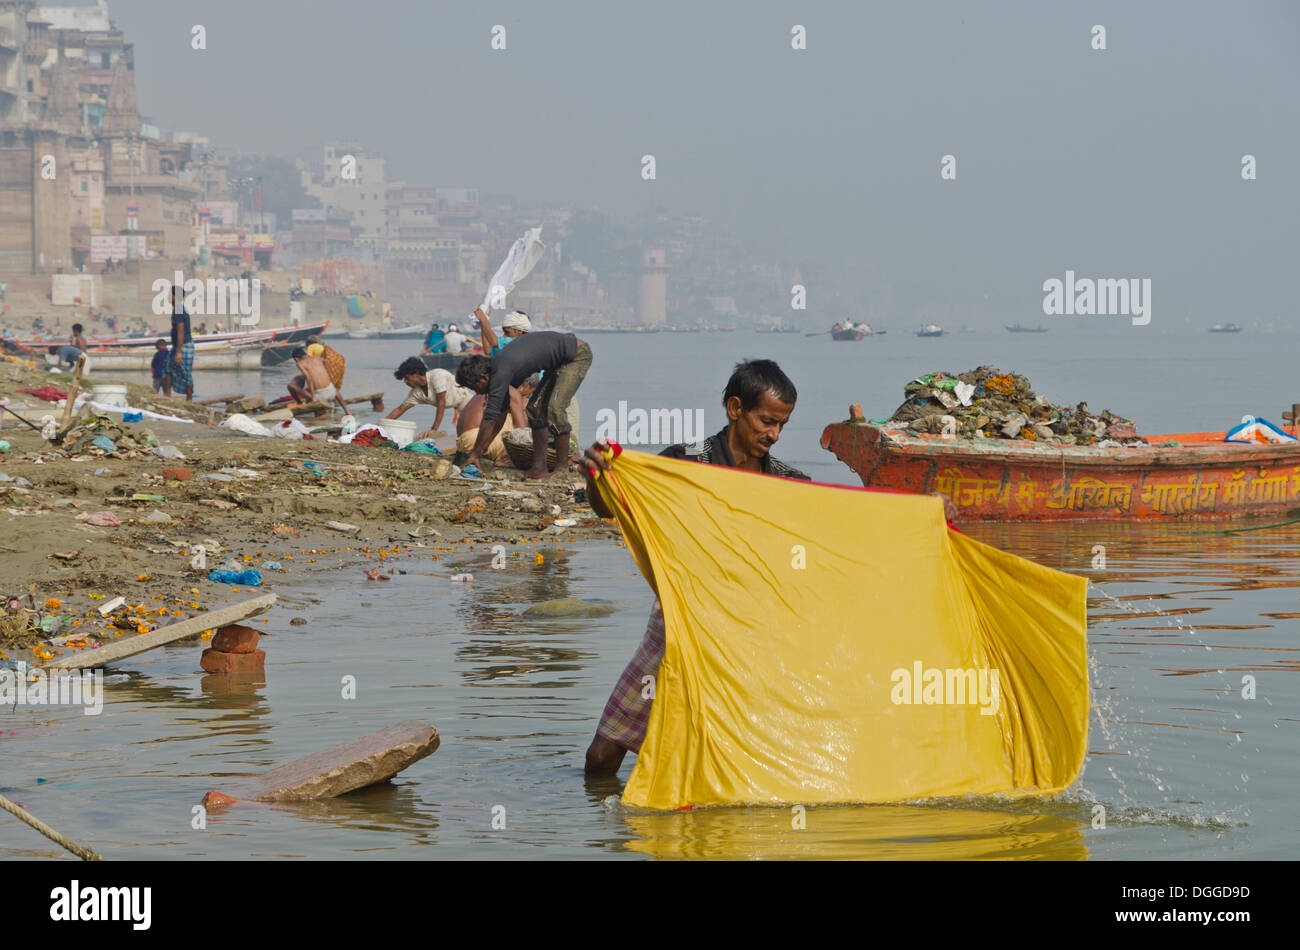 Dhobi walas, people of the laundry caste, doing their daily work at the ghats of Varanasi along the holy river Ganges, India Stock Photo